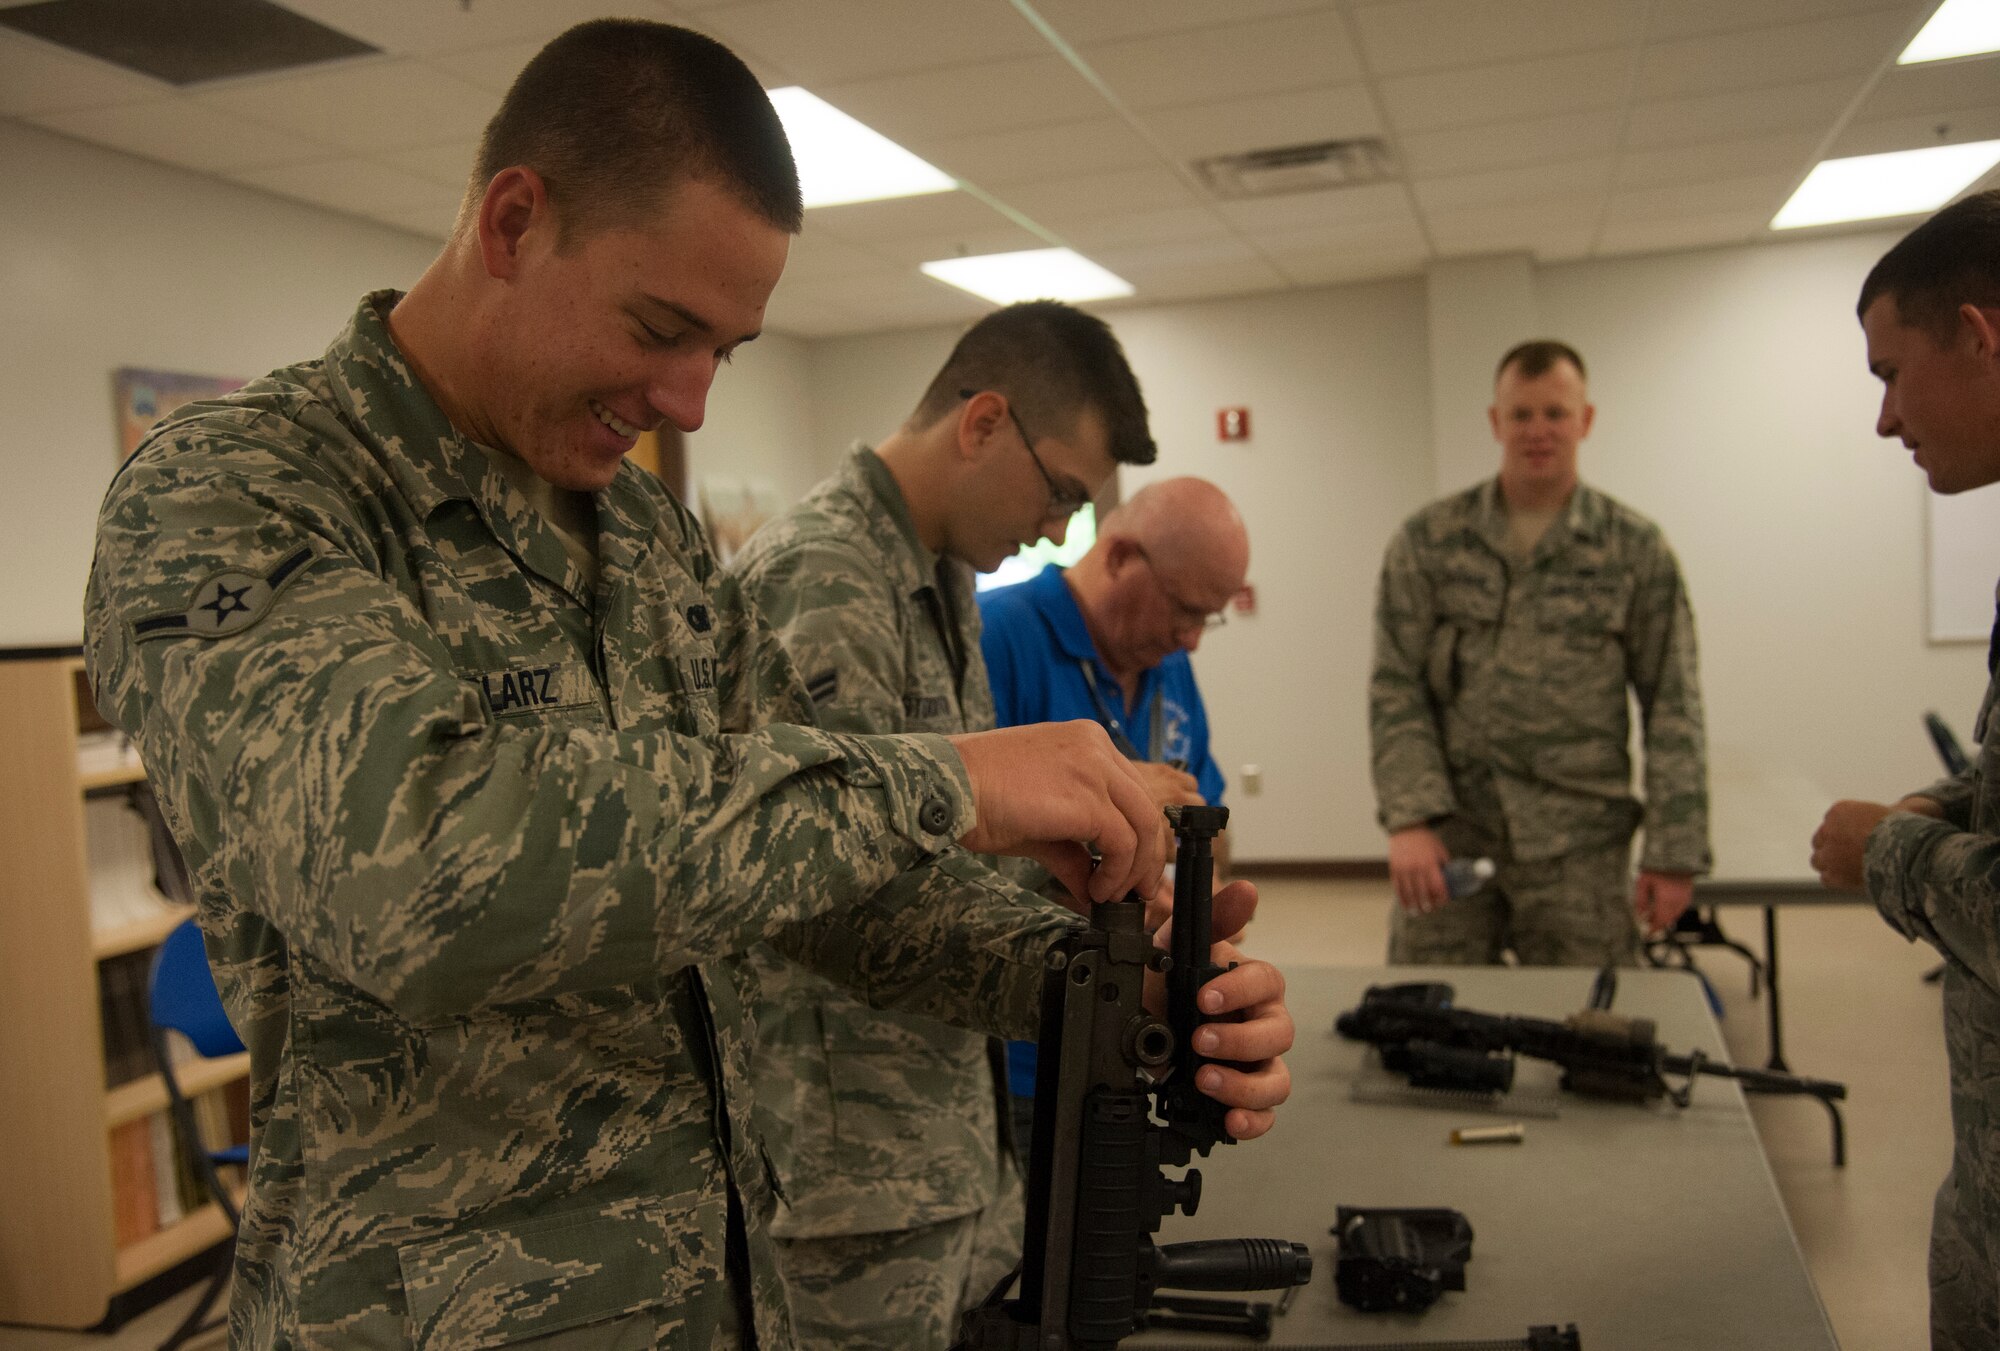 Alan Fox, a former Operation Safeside mortar crewman and a group of 820th Base Defense Group fireteam members piece together a weapons puzzle May 18, 2013. They assembled weapons in a timed completion at Moody Air Force Base, Ga. (U.S. Air Force photo by Airman 1st Class Sandra Marrero/Released)
